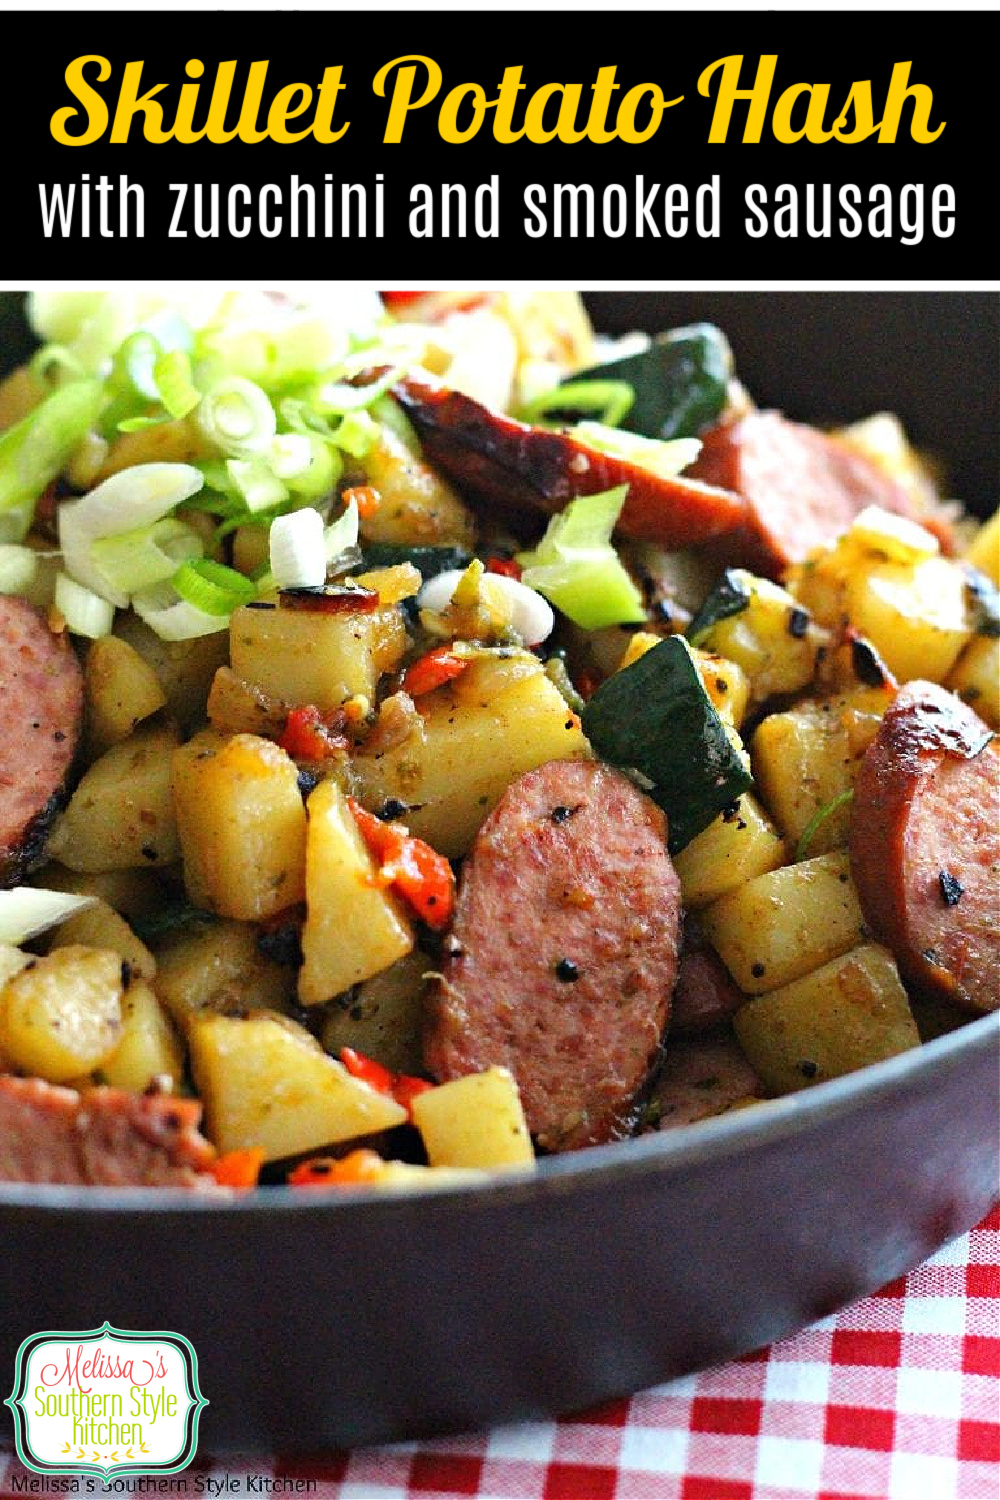 This skillet potato hash is filled with fresh zucchini and kielbasa making it a meal you can enjoy any time of day #potatohash #skilletmeals #zucchinirecipes #kielbasa #smokedsausage #food #dinnerideas #dinner #castironcooking #southernfood #southernrecipes #brunch #breakfast #potatoes via @melissasssk